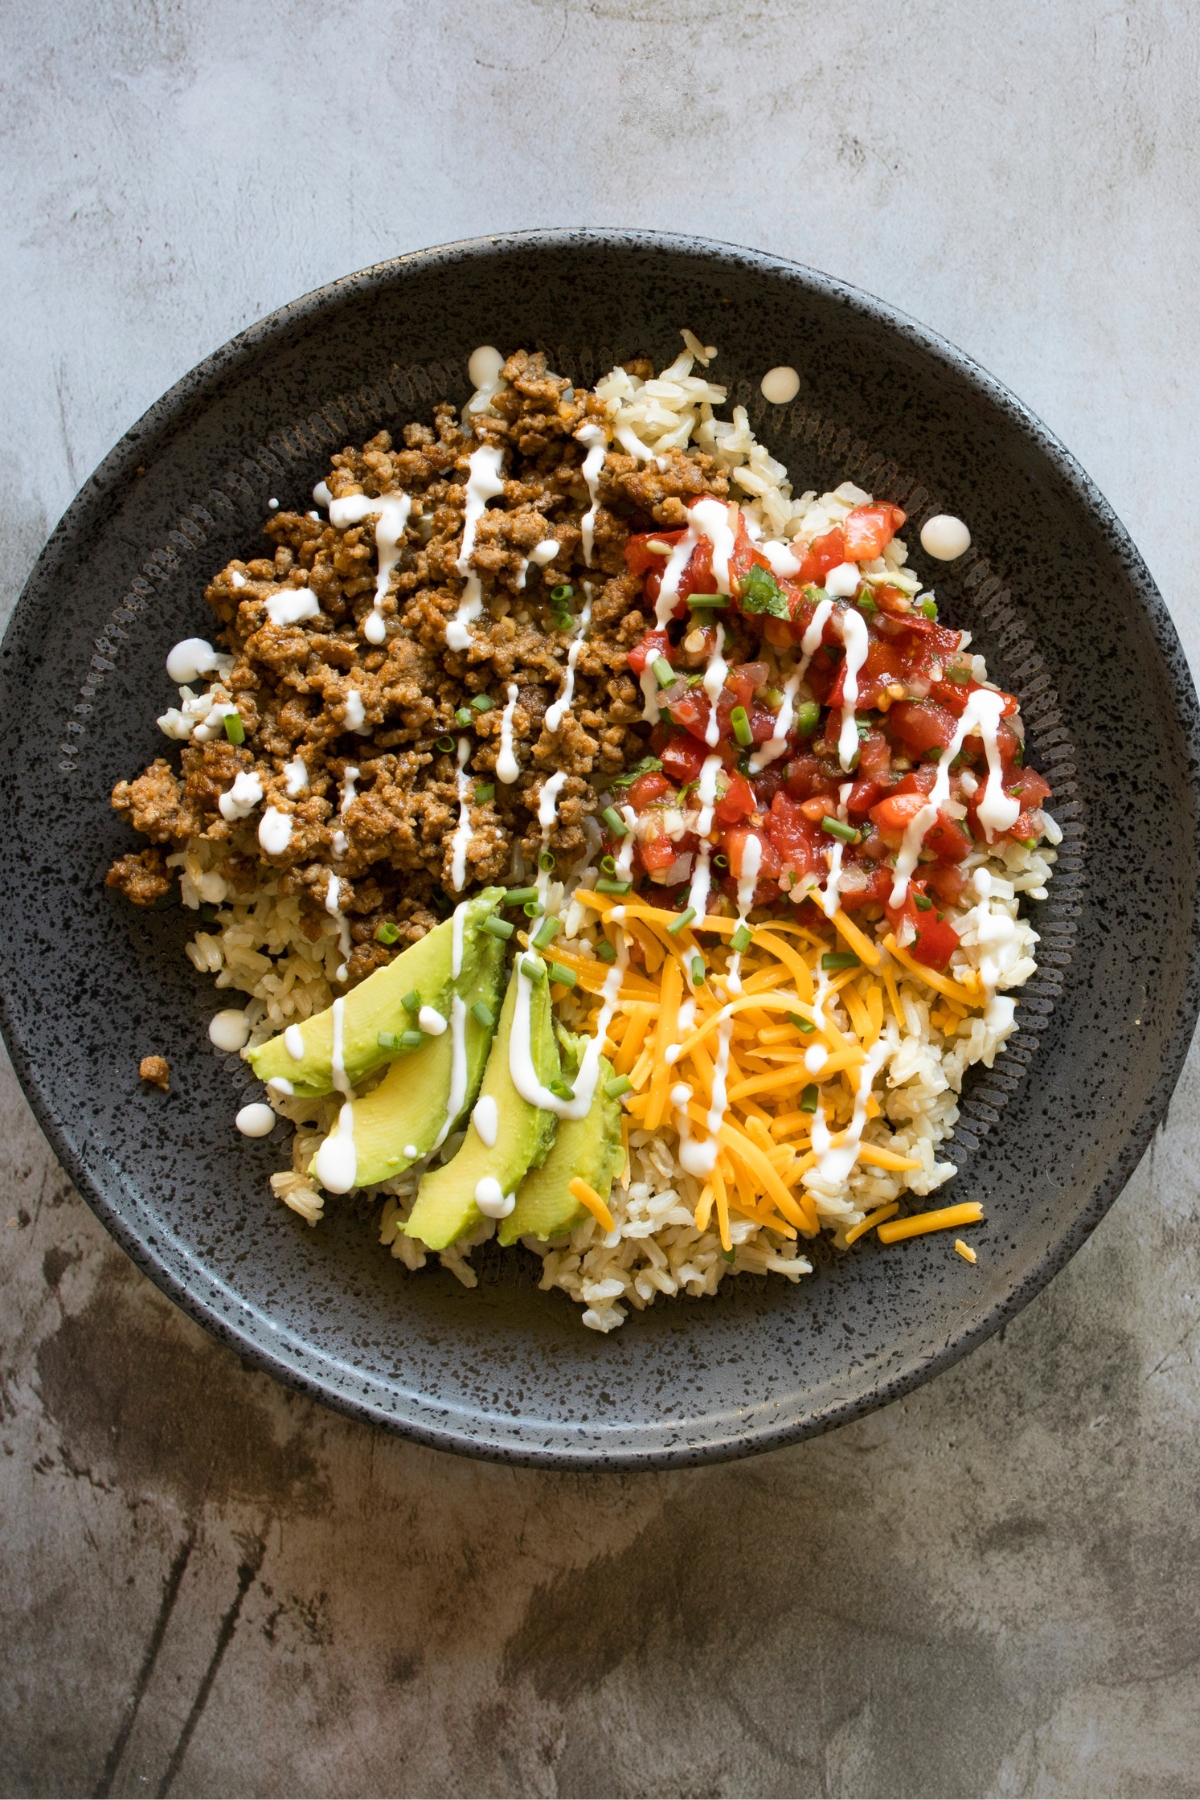 https://insanelygoodrecipes.com/wp-content/uploads/2023/09/Mexican-Taco-Bowl-with-Salsa-Avocado-Ground-Beef-and-Cheese.jpg